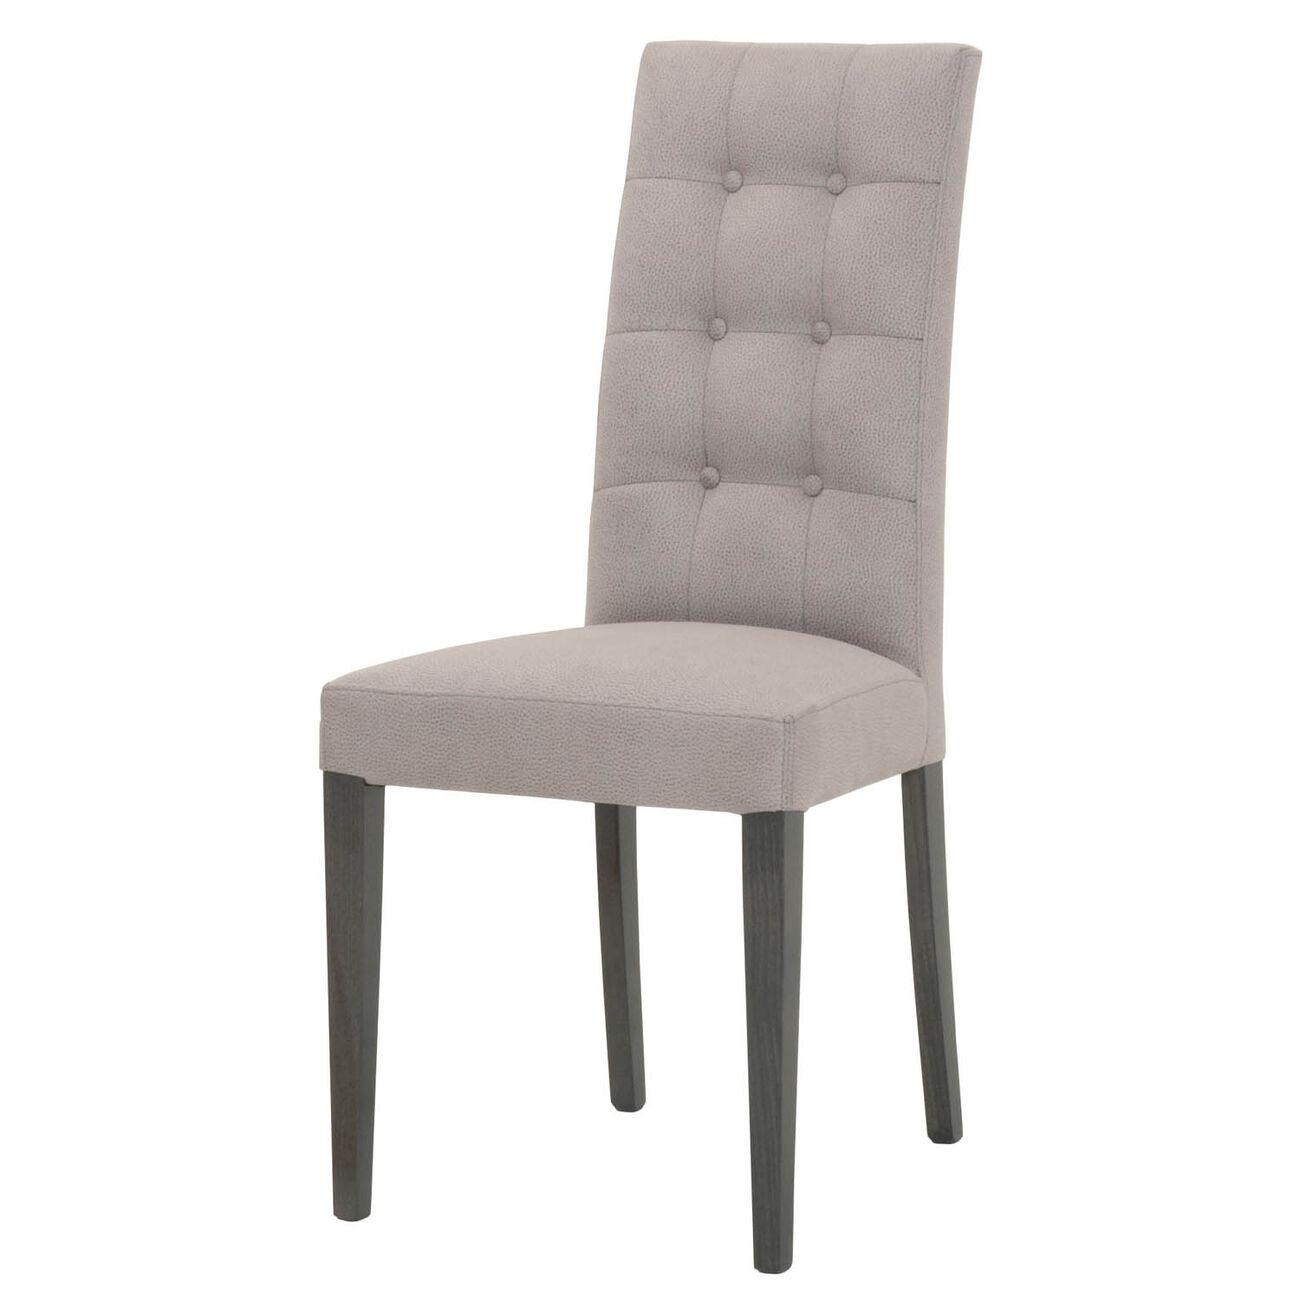 Fabric Upholstery Dining Chair With Button Tufted Back, Gray, Set Of Two